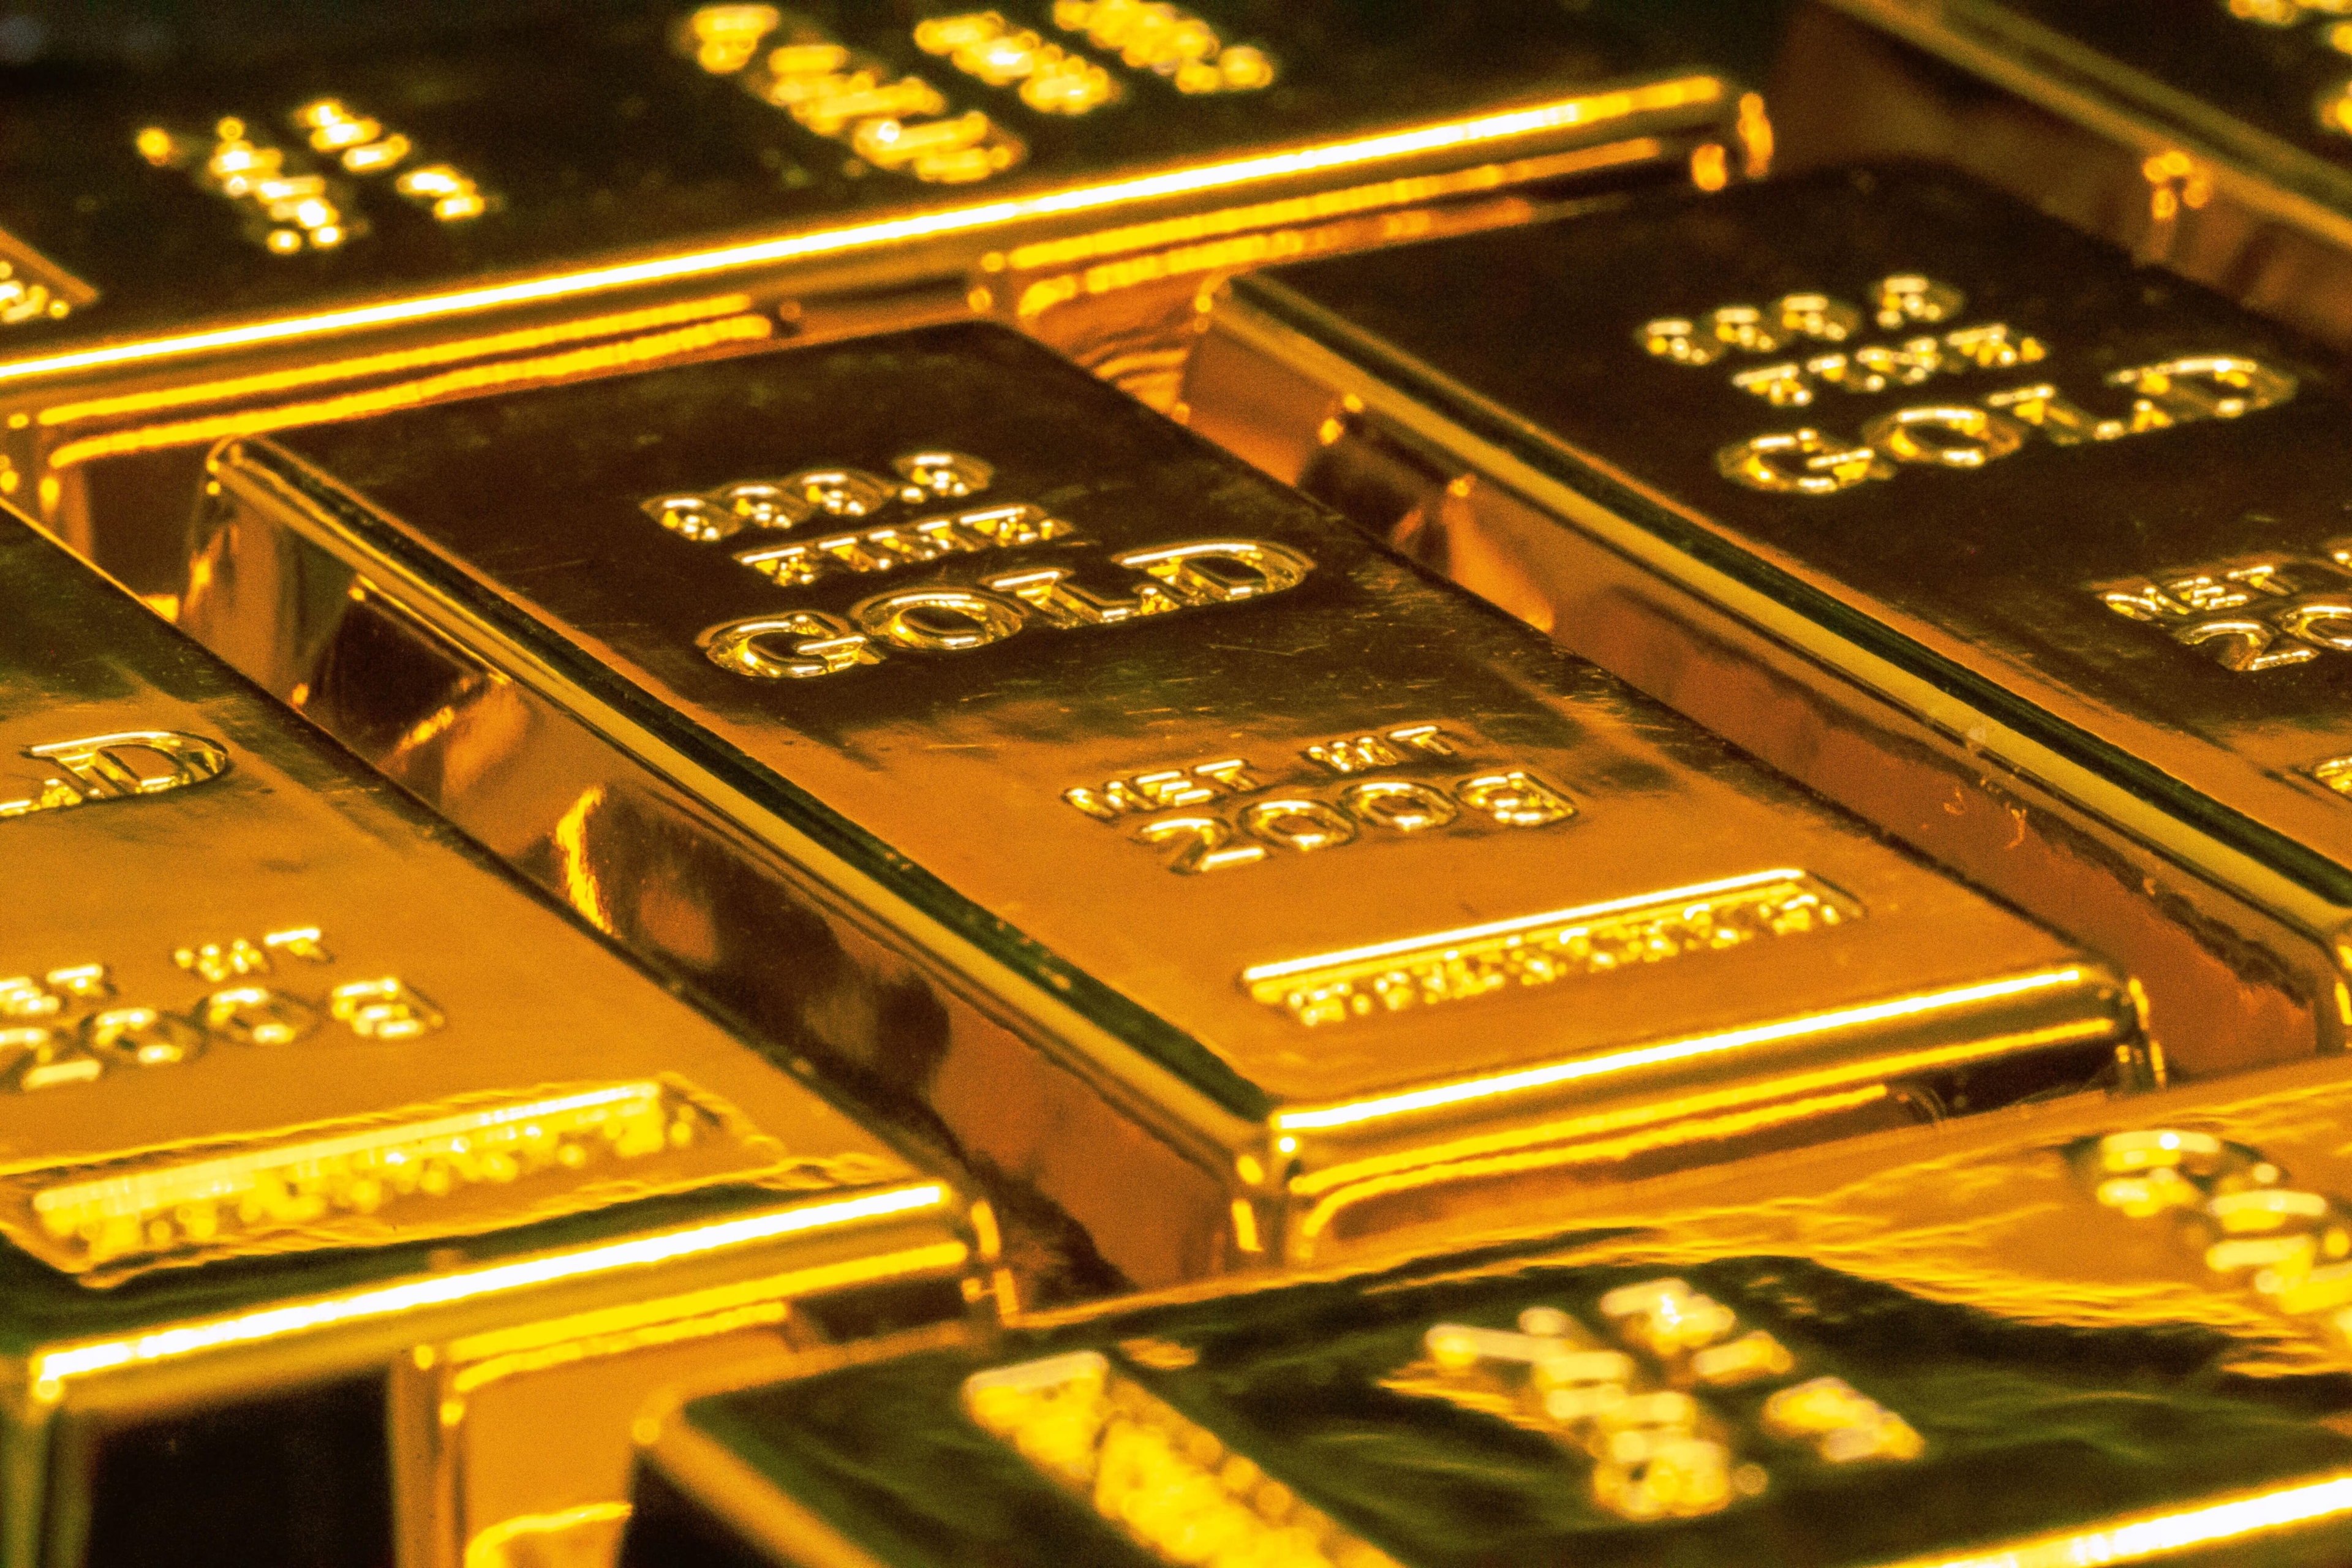 Gold extended its gain on April 18 in the international markets amid gains in global energy prices and fear of higher inflation. Gold June futures contract settled at $1986.40 per troy ounce with a gain of 0.70 percent.